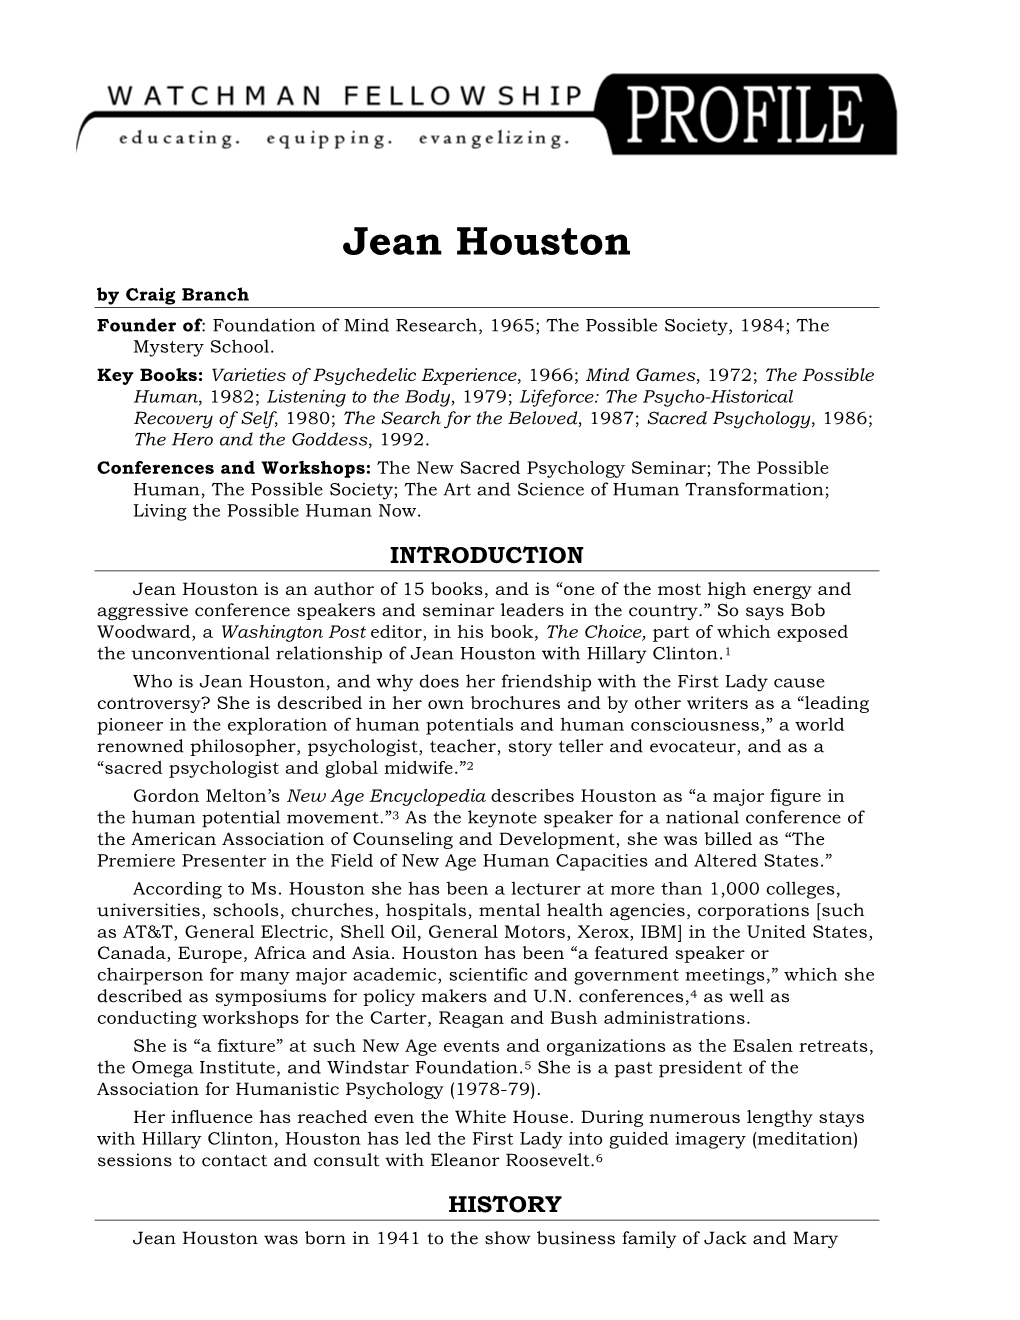 Jean Houston by Craig Branch Founder Of: Foundation of Mind Research, 1965; the Possible Society, 1984; the Mystery School